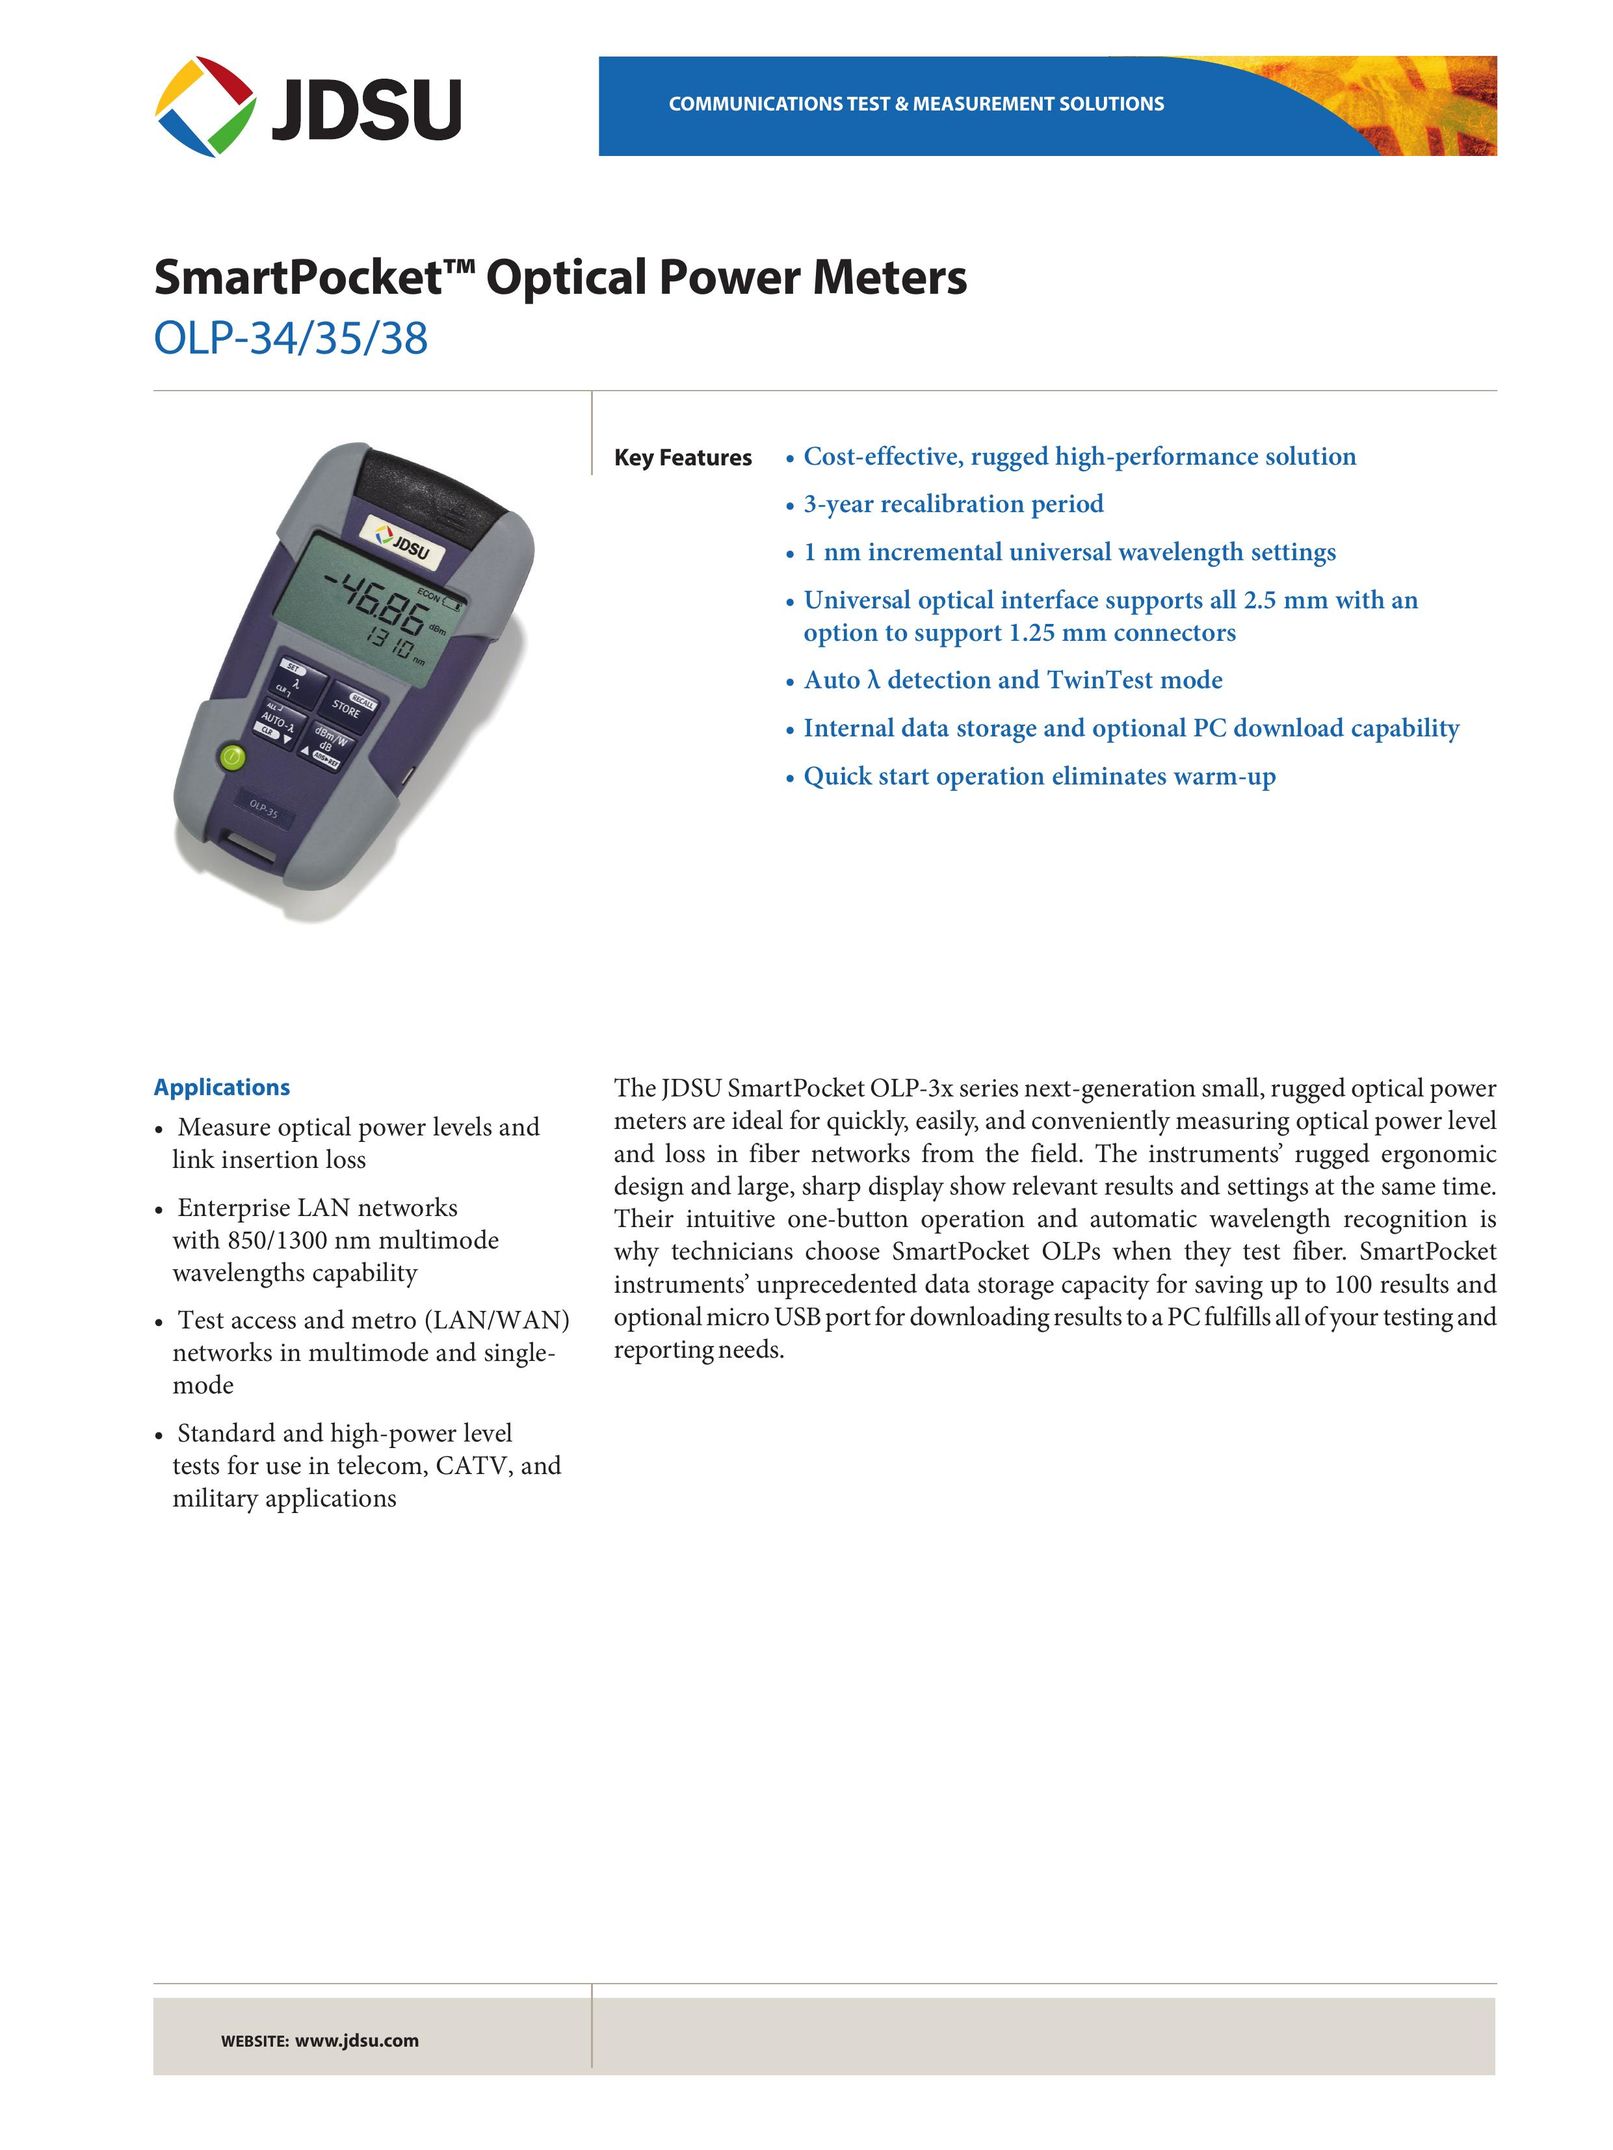 JDS Uniphase OLP-34 Electronic Accessory User Manual